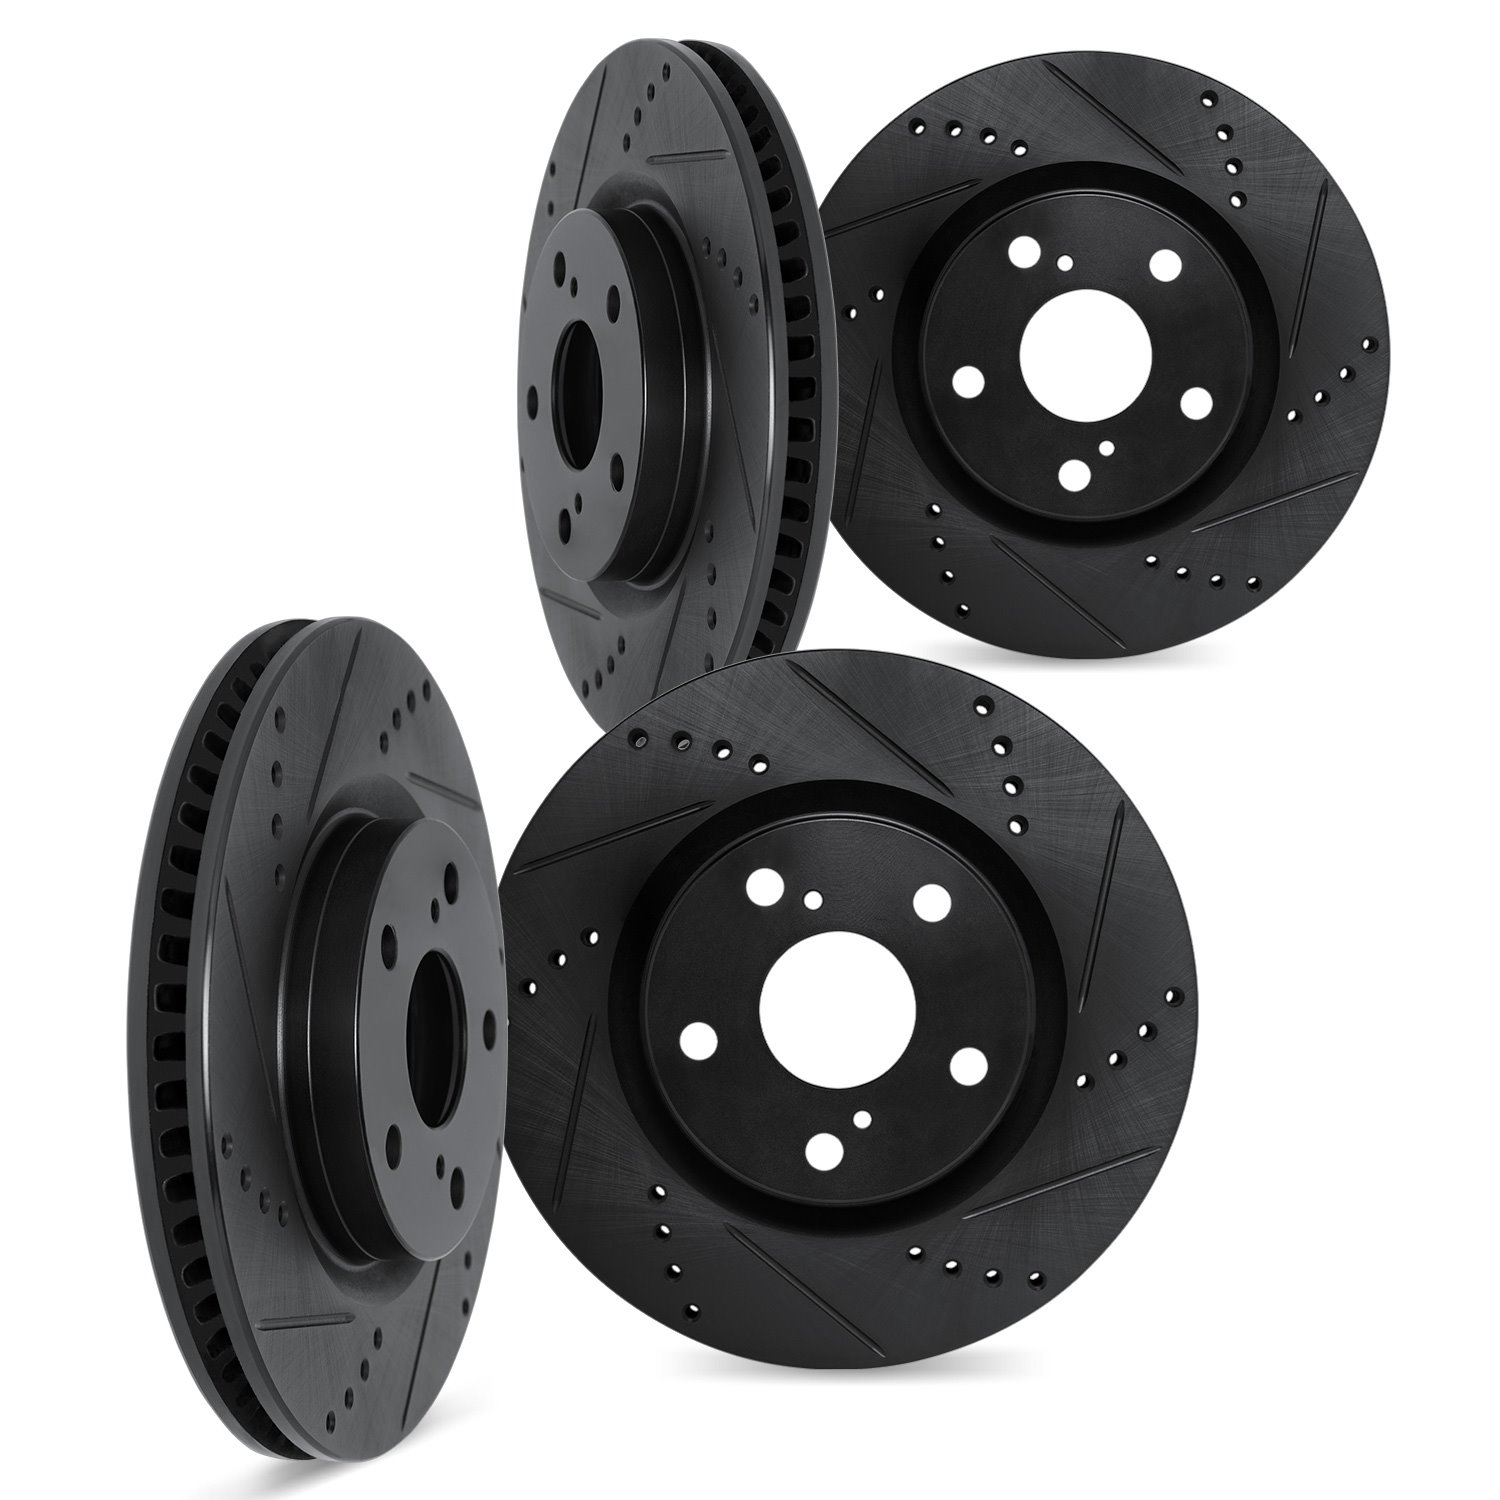 8004-13055 Drilled/Slotted Brake Rotors [Black], Fits Select Subaru, Position: Front and Rear